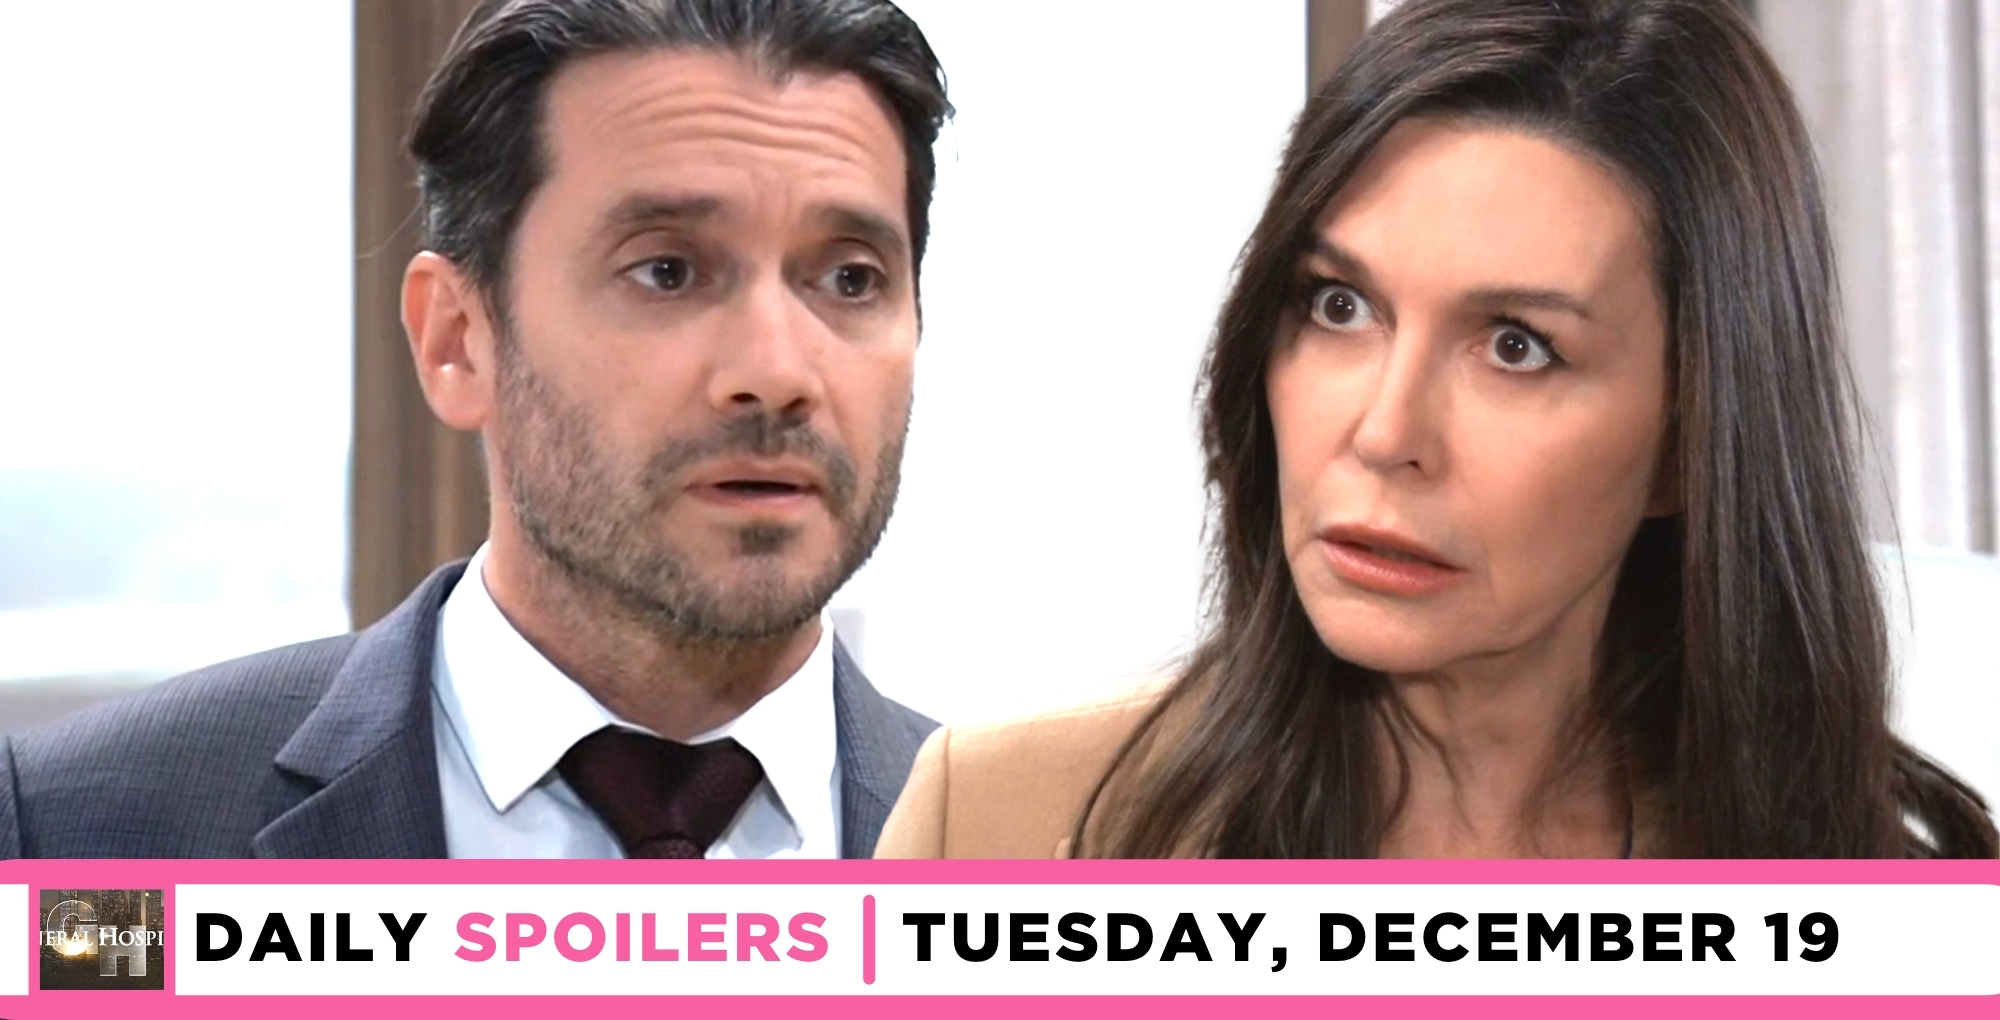 general hospital spoilers for tuesday, december 19, 2023 feature dante and anna devane.